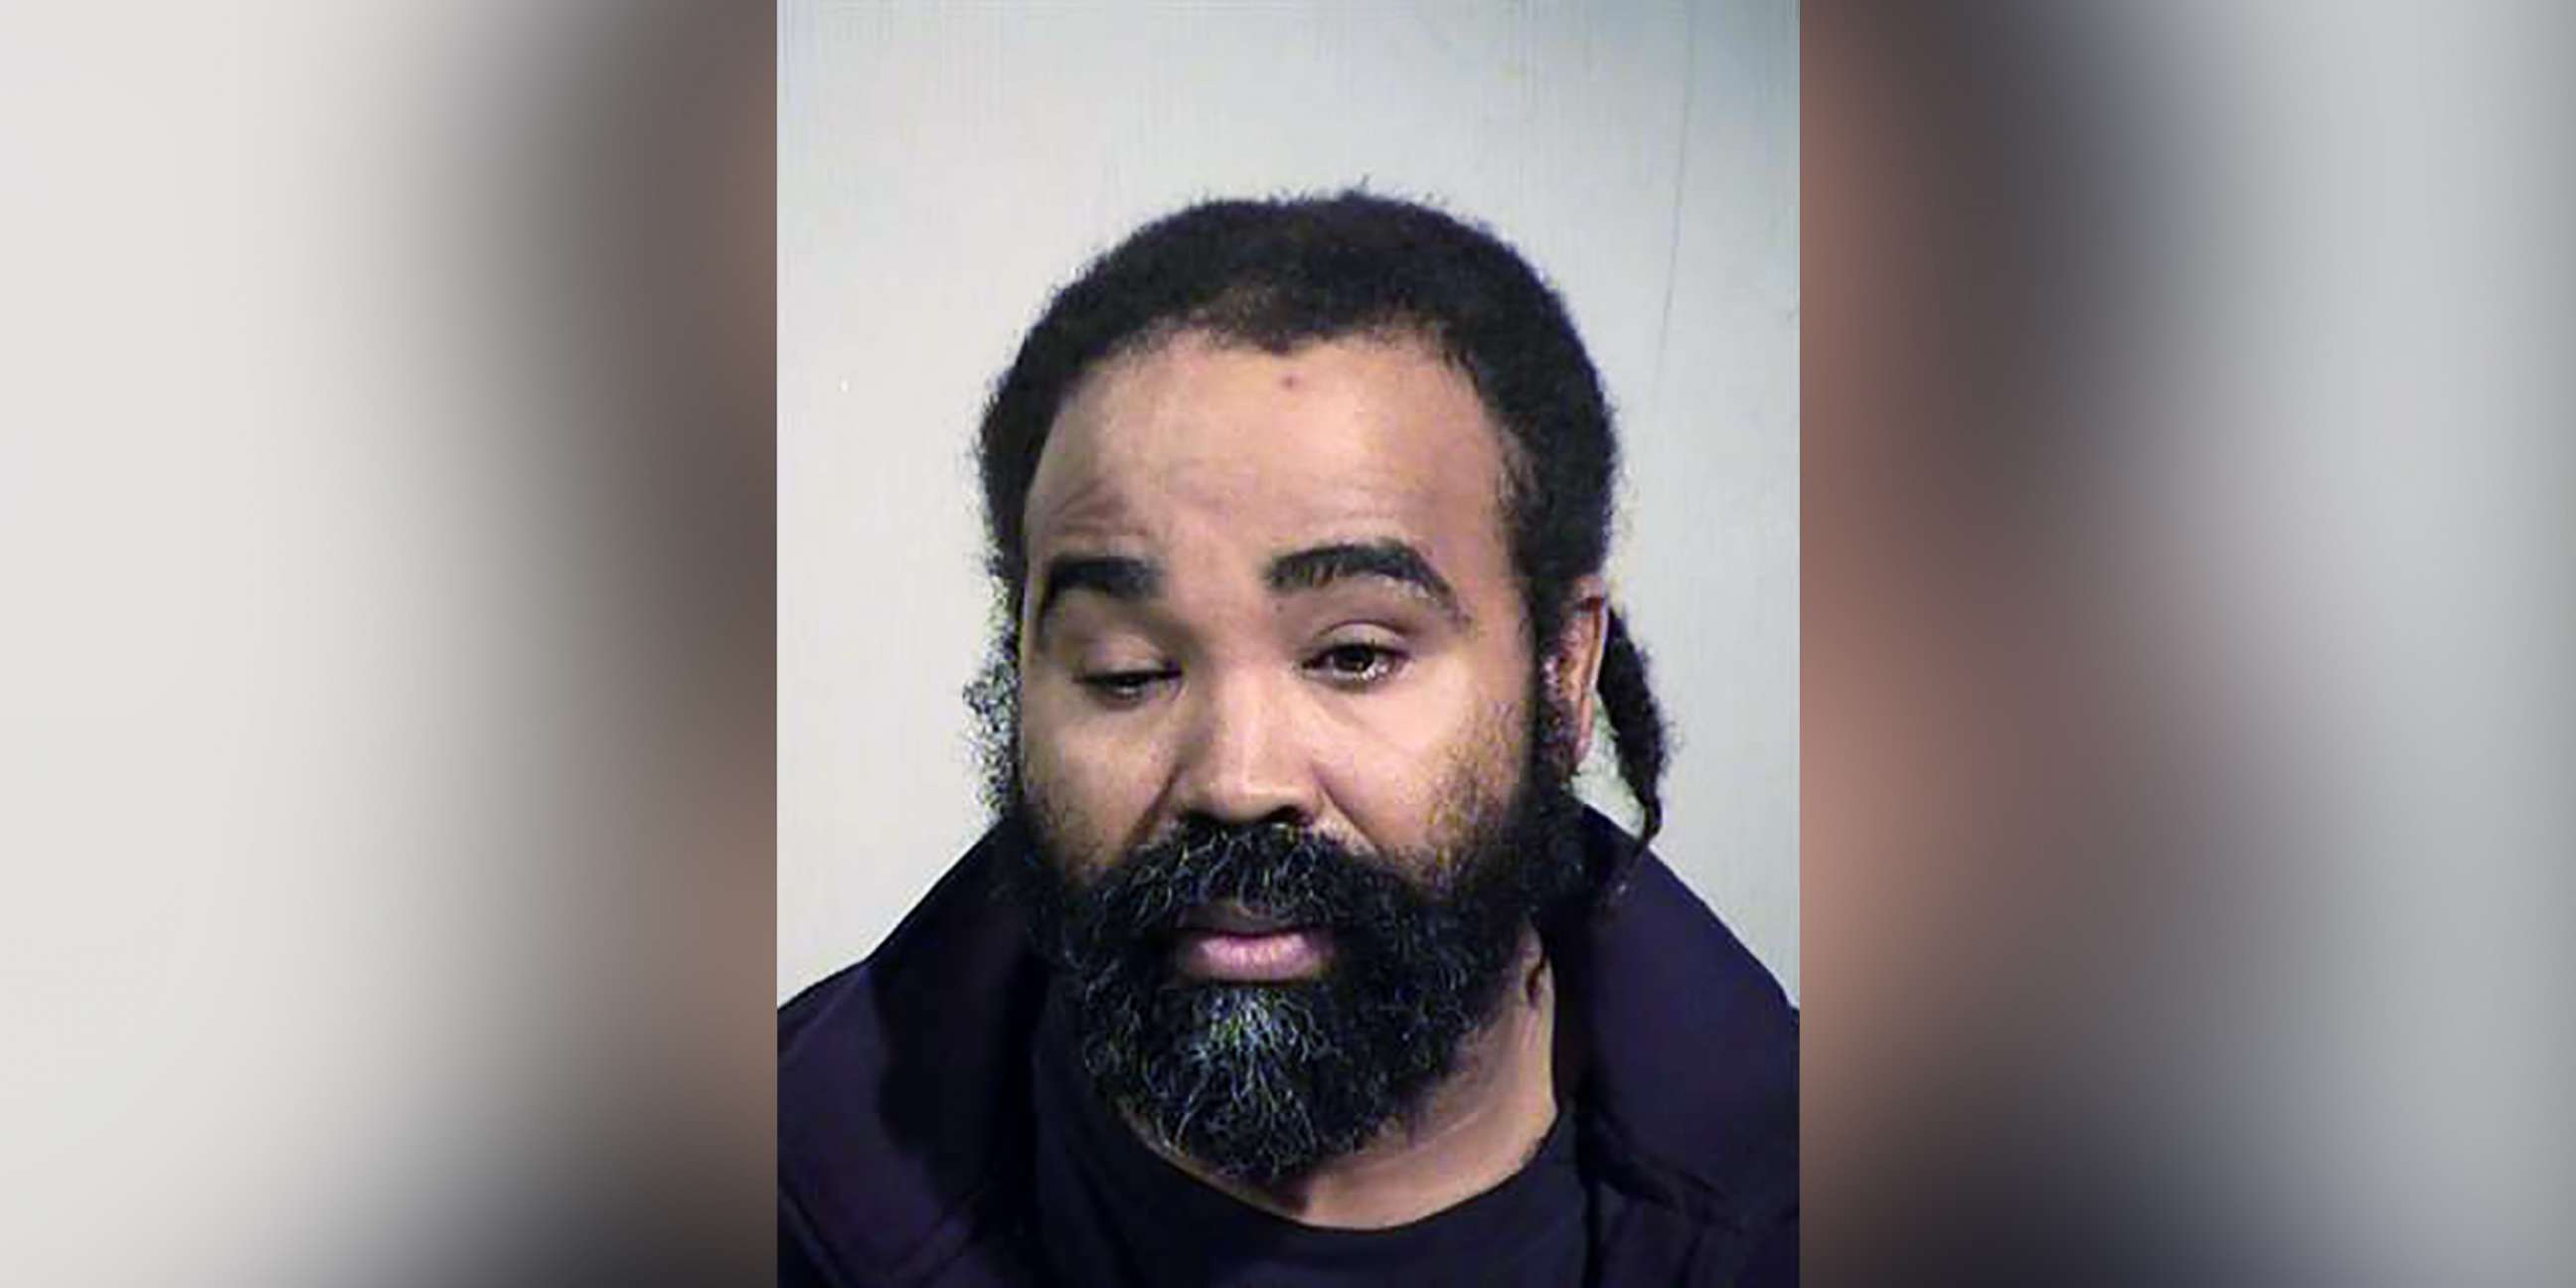 PHOTO: Nathan Sutherland, 36, has been arrested in connection with a woman who gave birth while in a vegetative state.